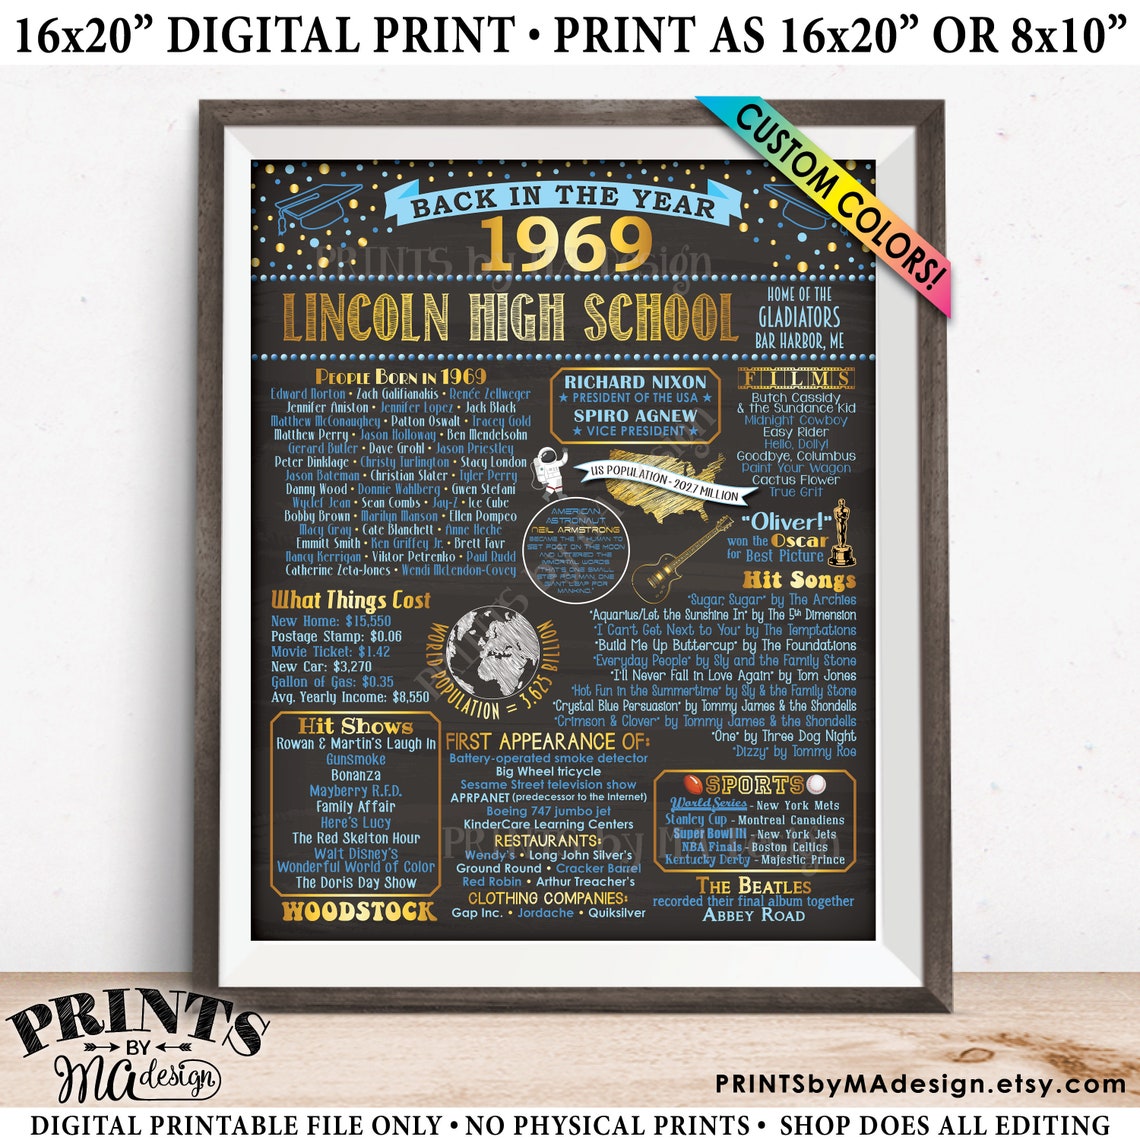 back-in-1969-poster-board-class-of-1969-flashback-to-1969-etsy